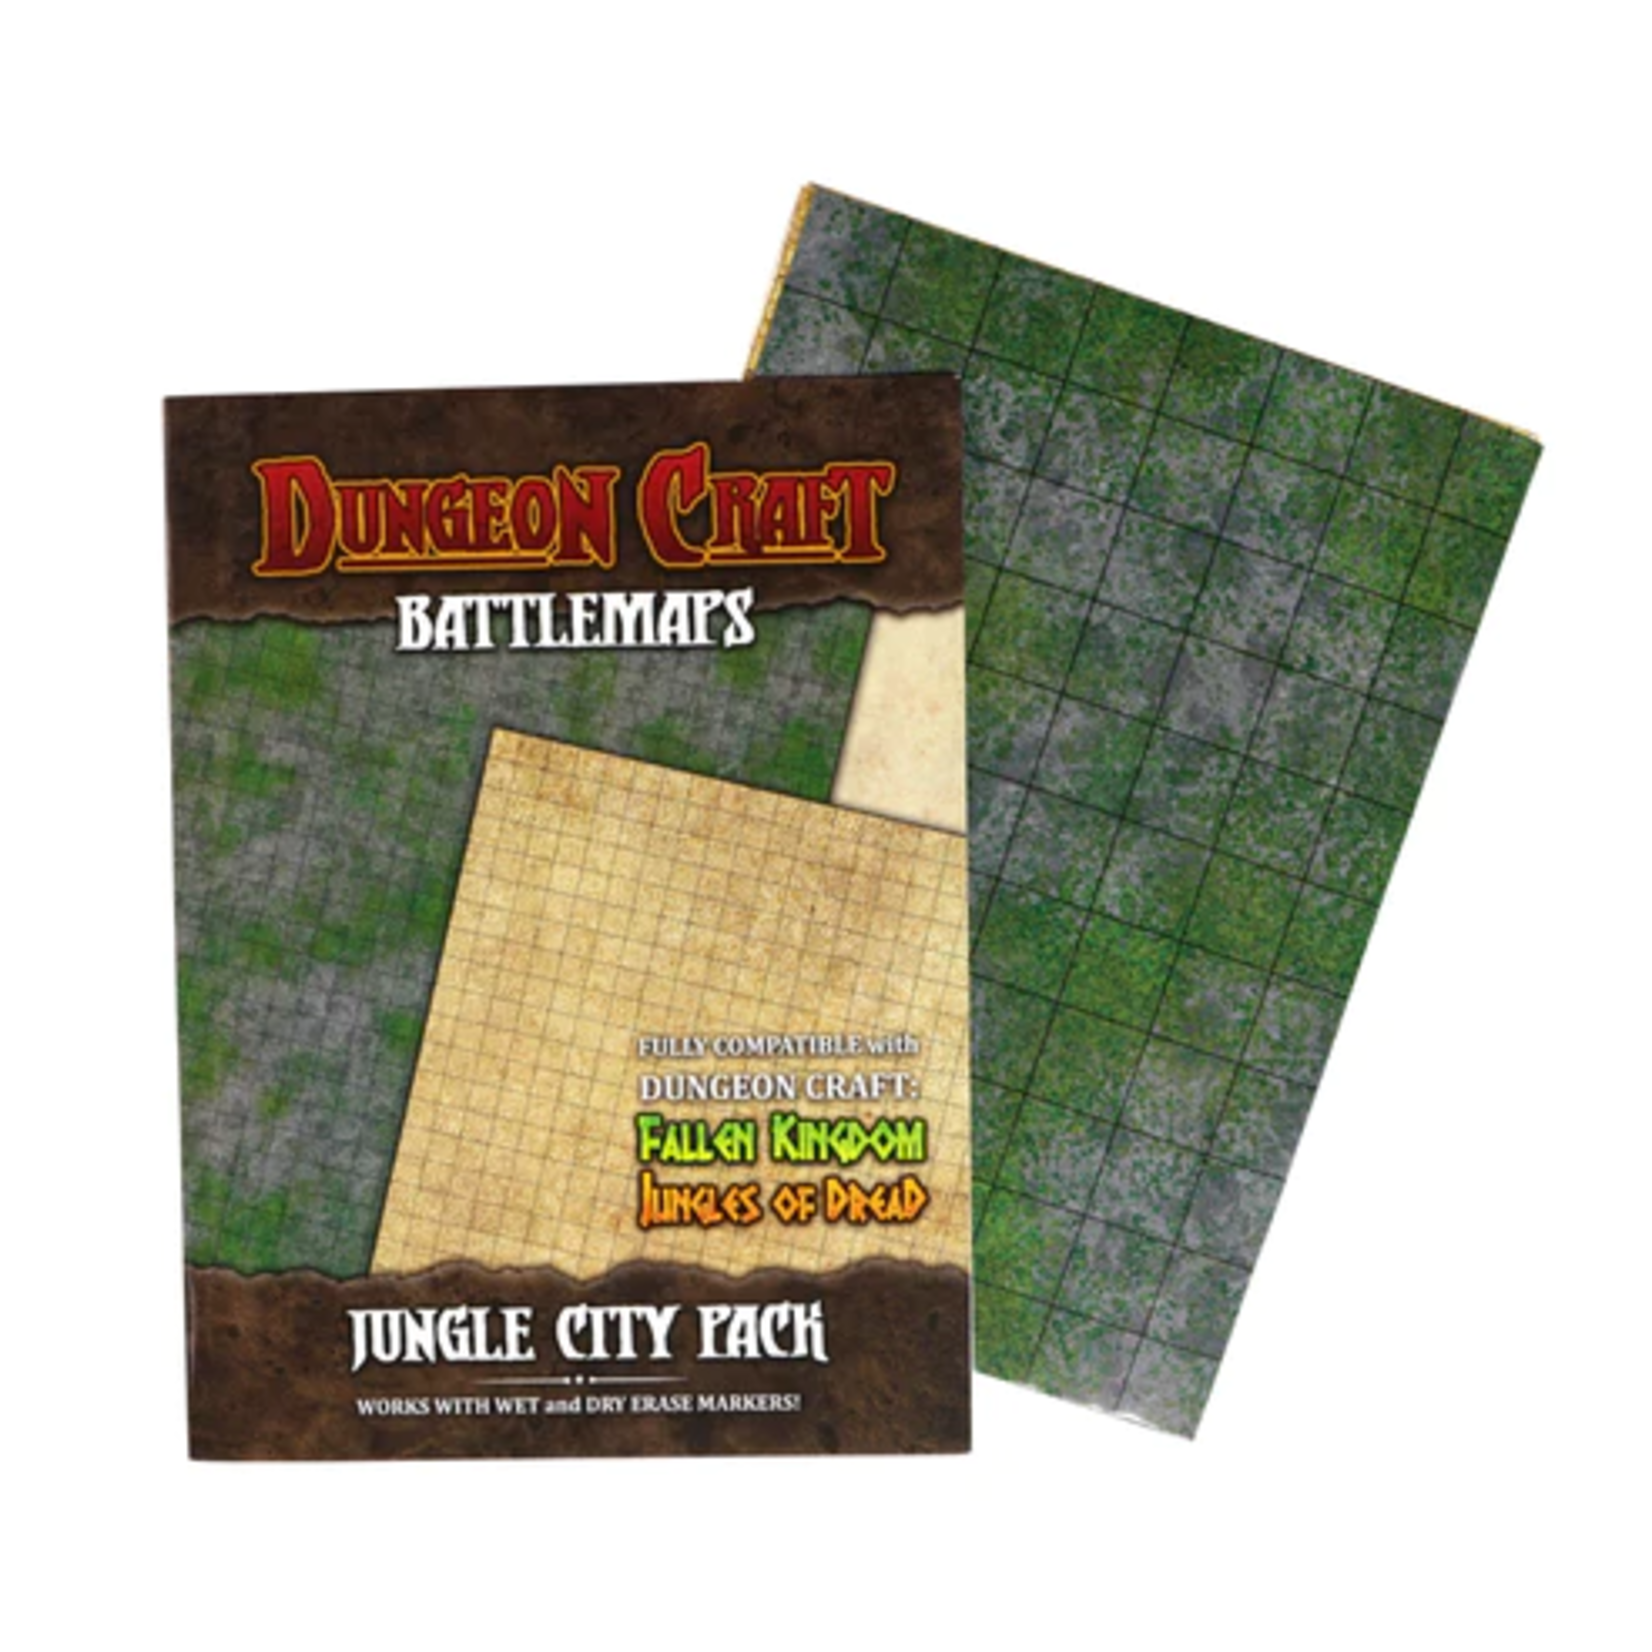 1985 Games Dungeon Craft Battle Maps Jungle City Pack